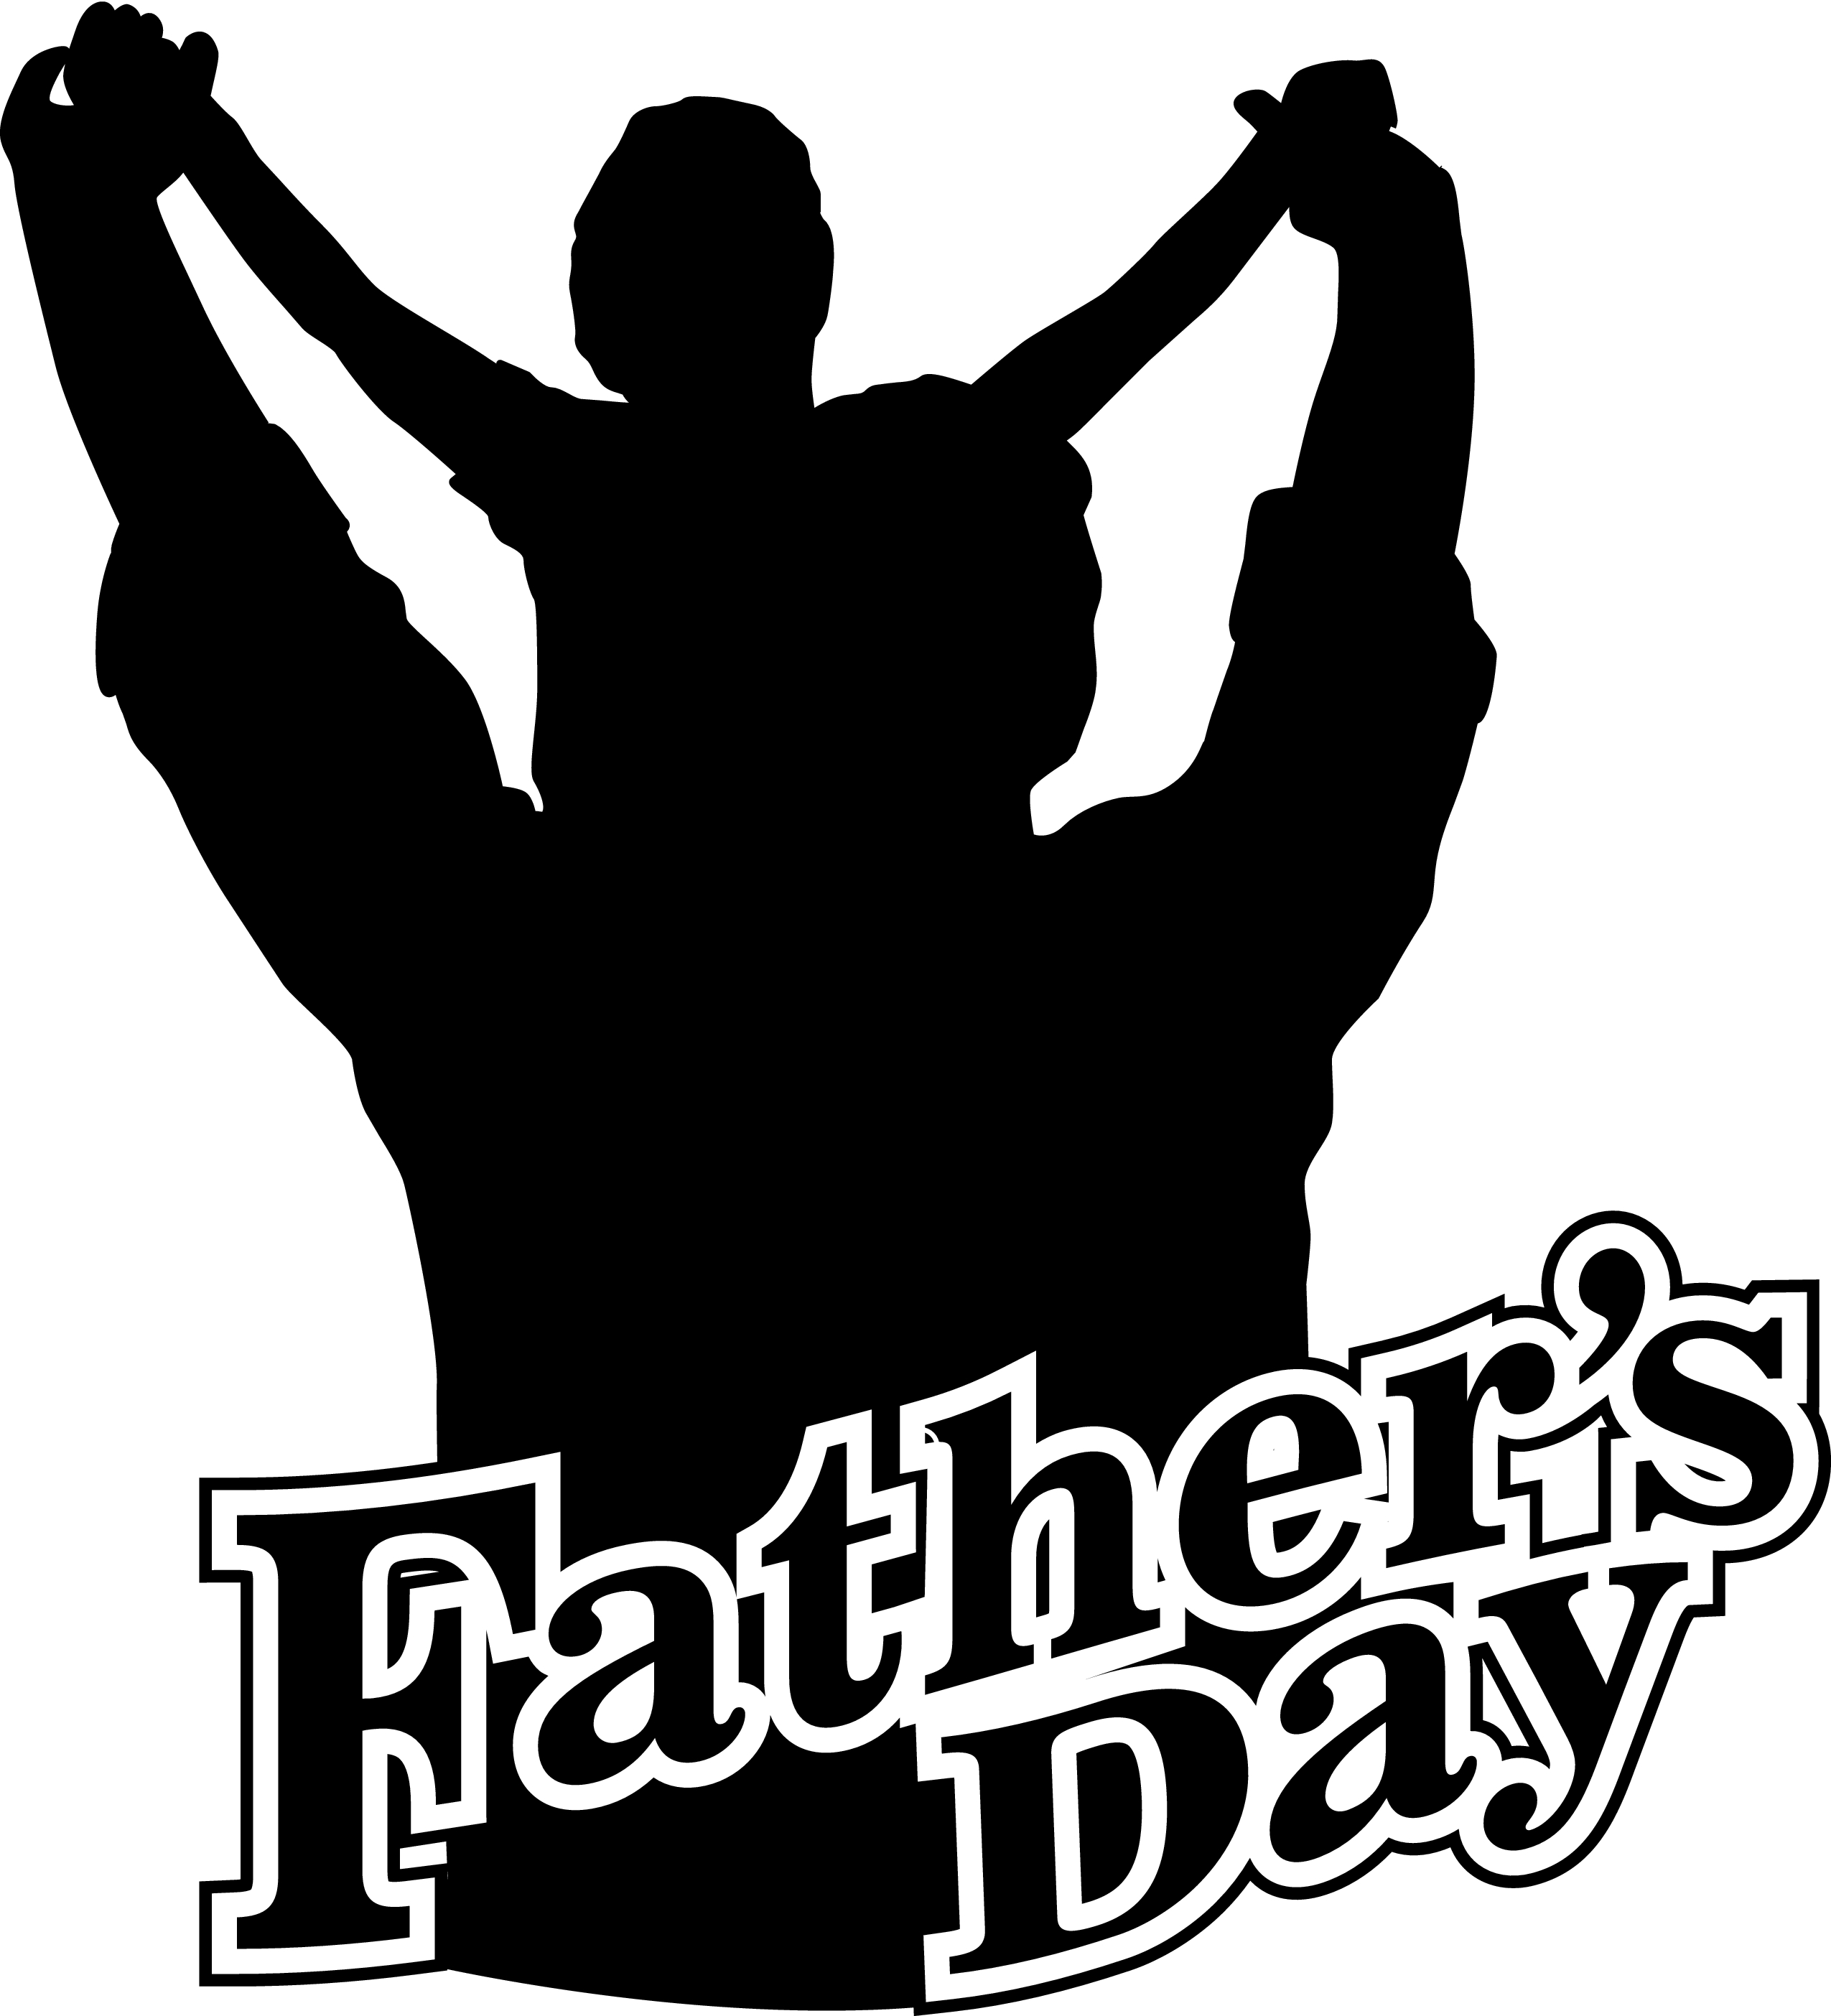 Fathers Day Clipart Png Image Pngio